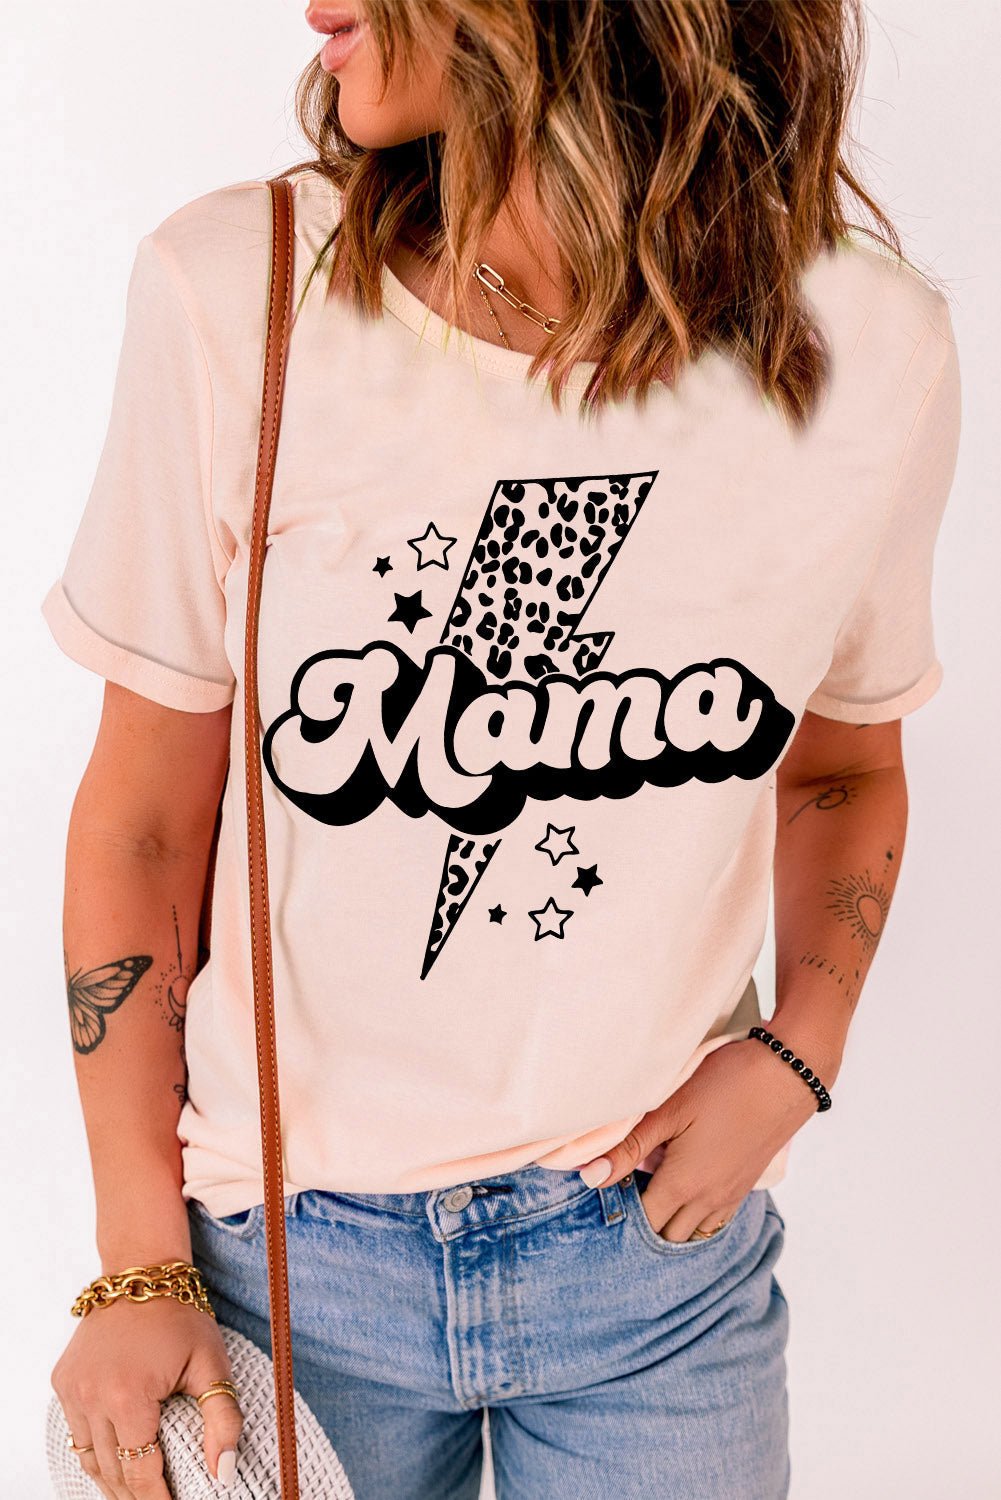 "Embrace the Goddess Within with MAMA's Lightning Graphic Tee - Let Your Playful Charm Sparkle in this Soft and Flattering Piece" - Guy Christopher